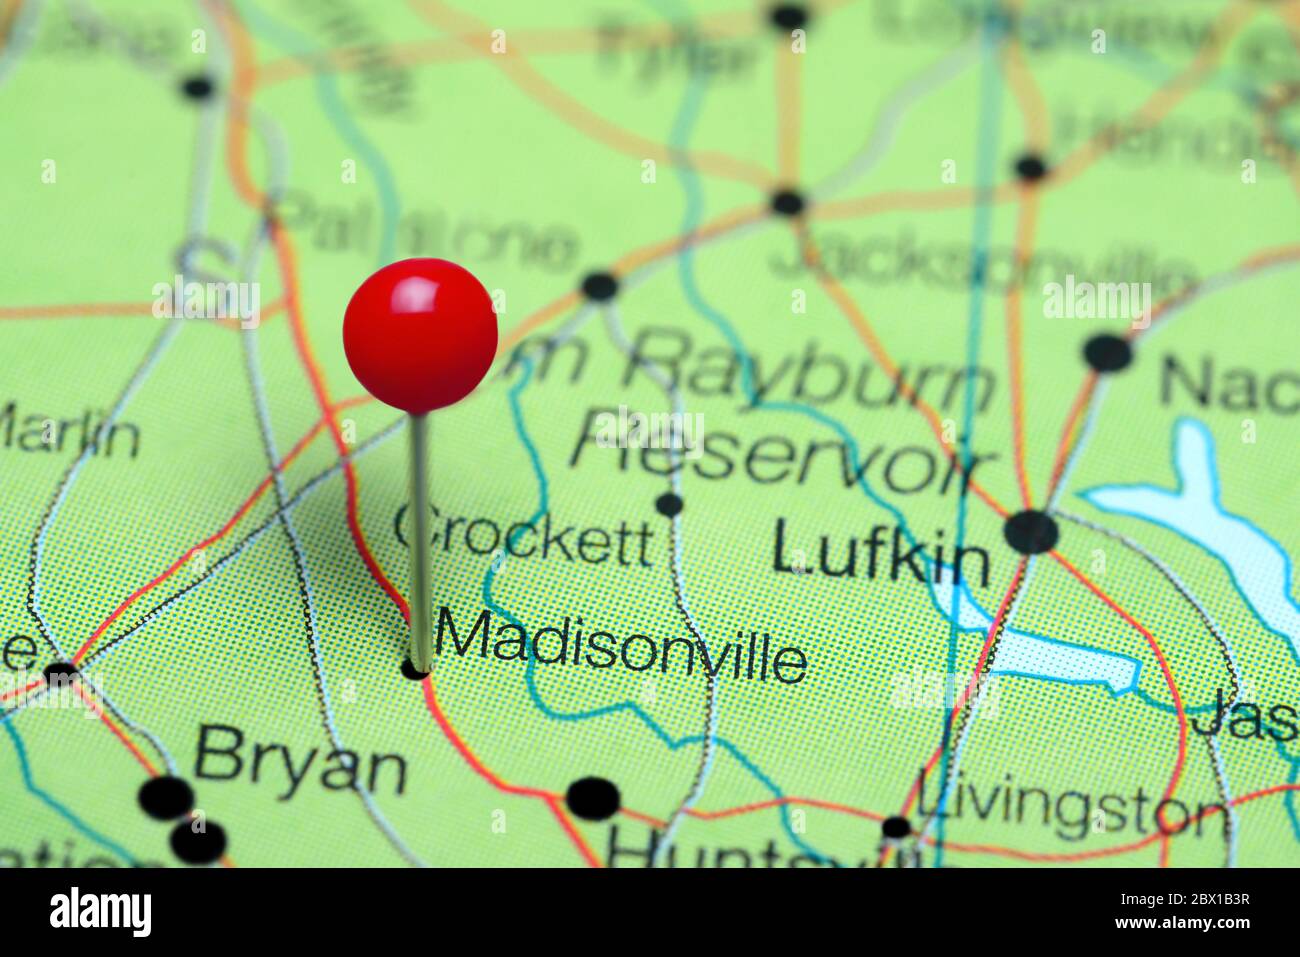 Madisonville pinned on a map of Texas, USA Stock Photo